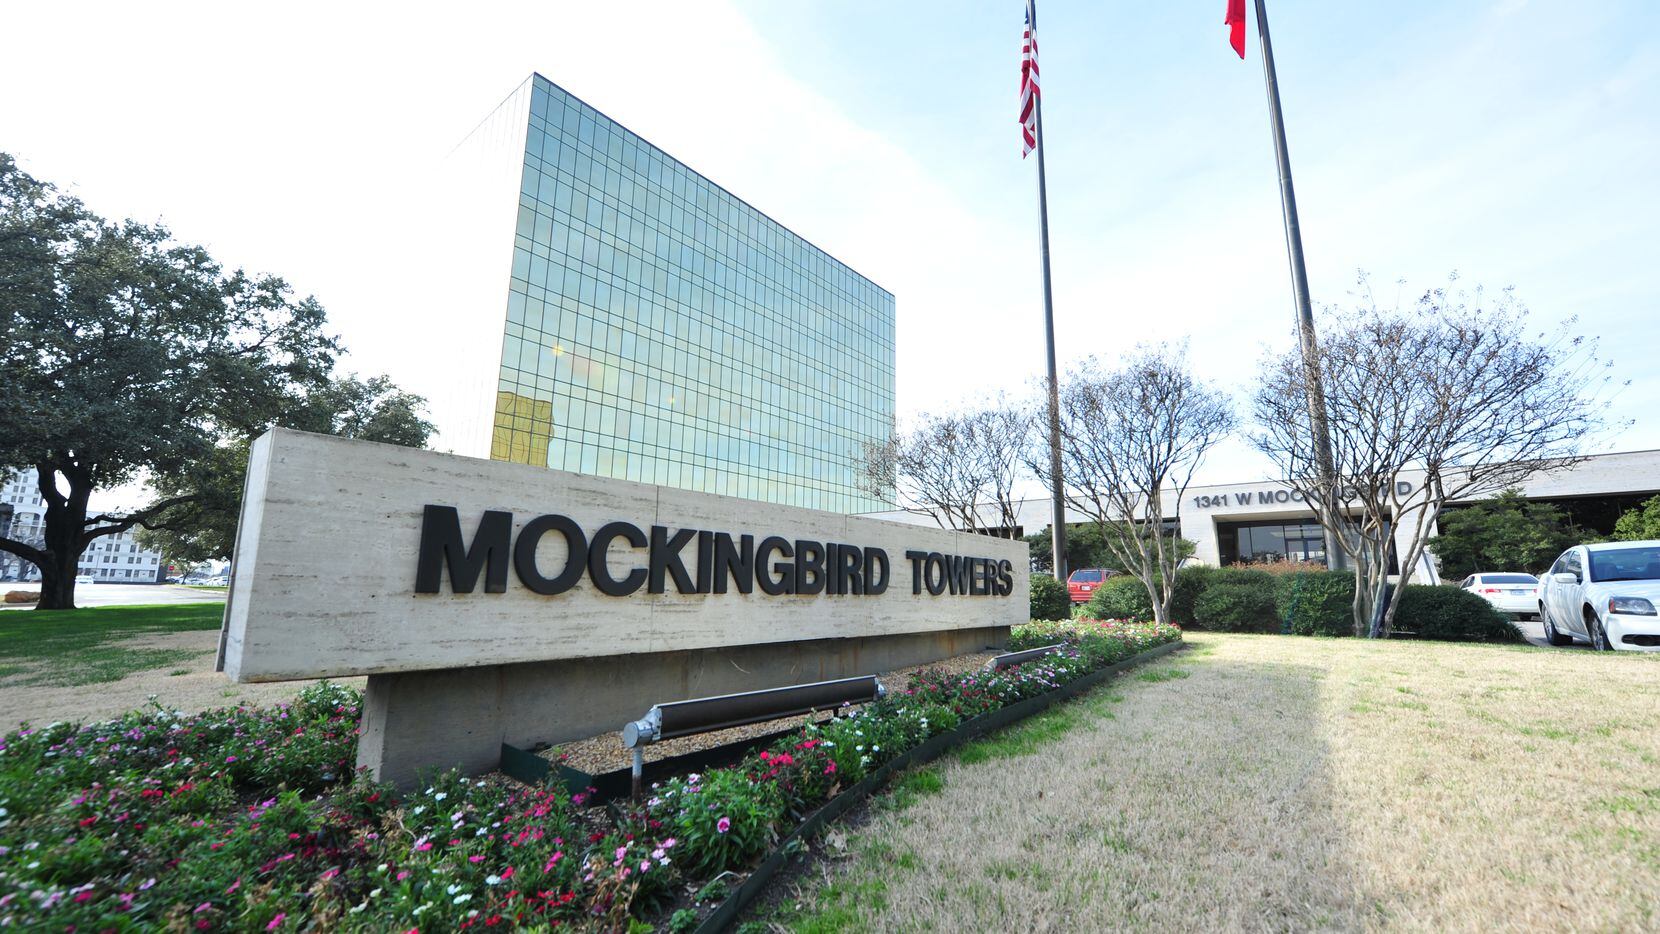 The two-building Mockingbird Towers is between Stemmons Freeway and Love Field.